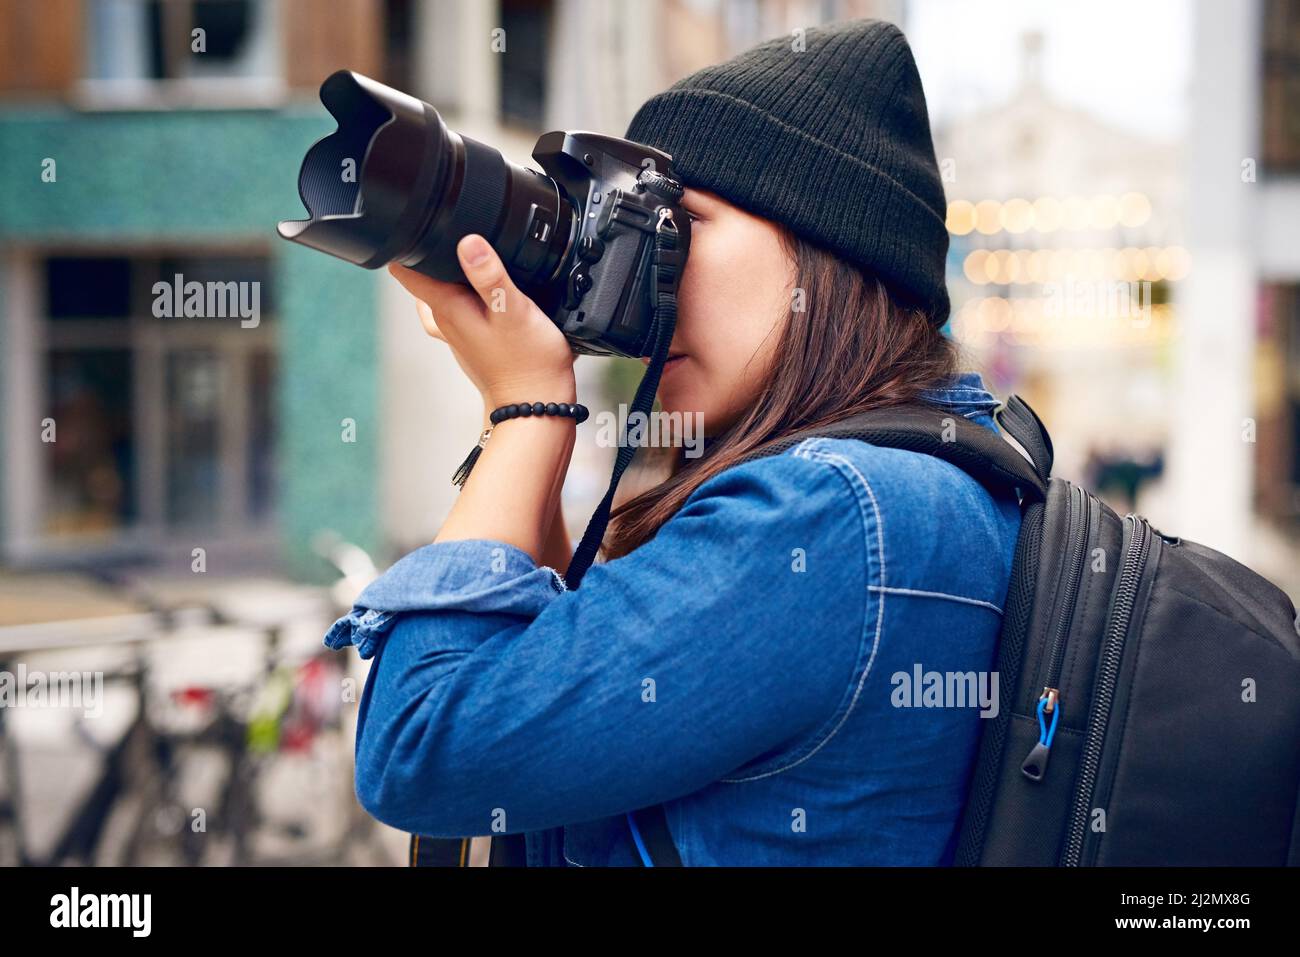 Seeing and capturing the world. Shot of a woman taking pictures with her camera outside. Stock Photo